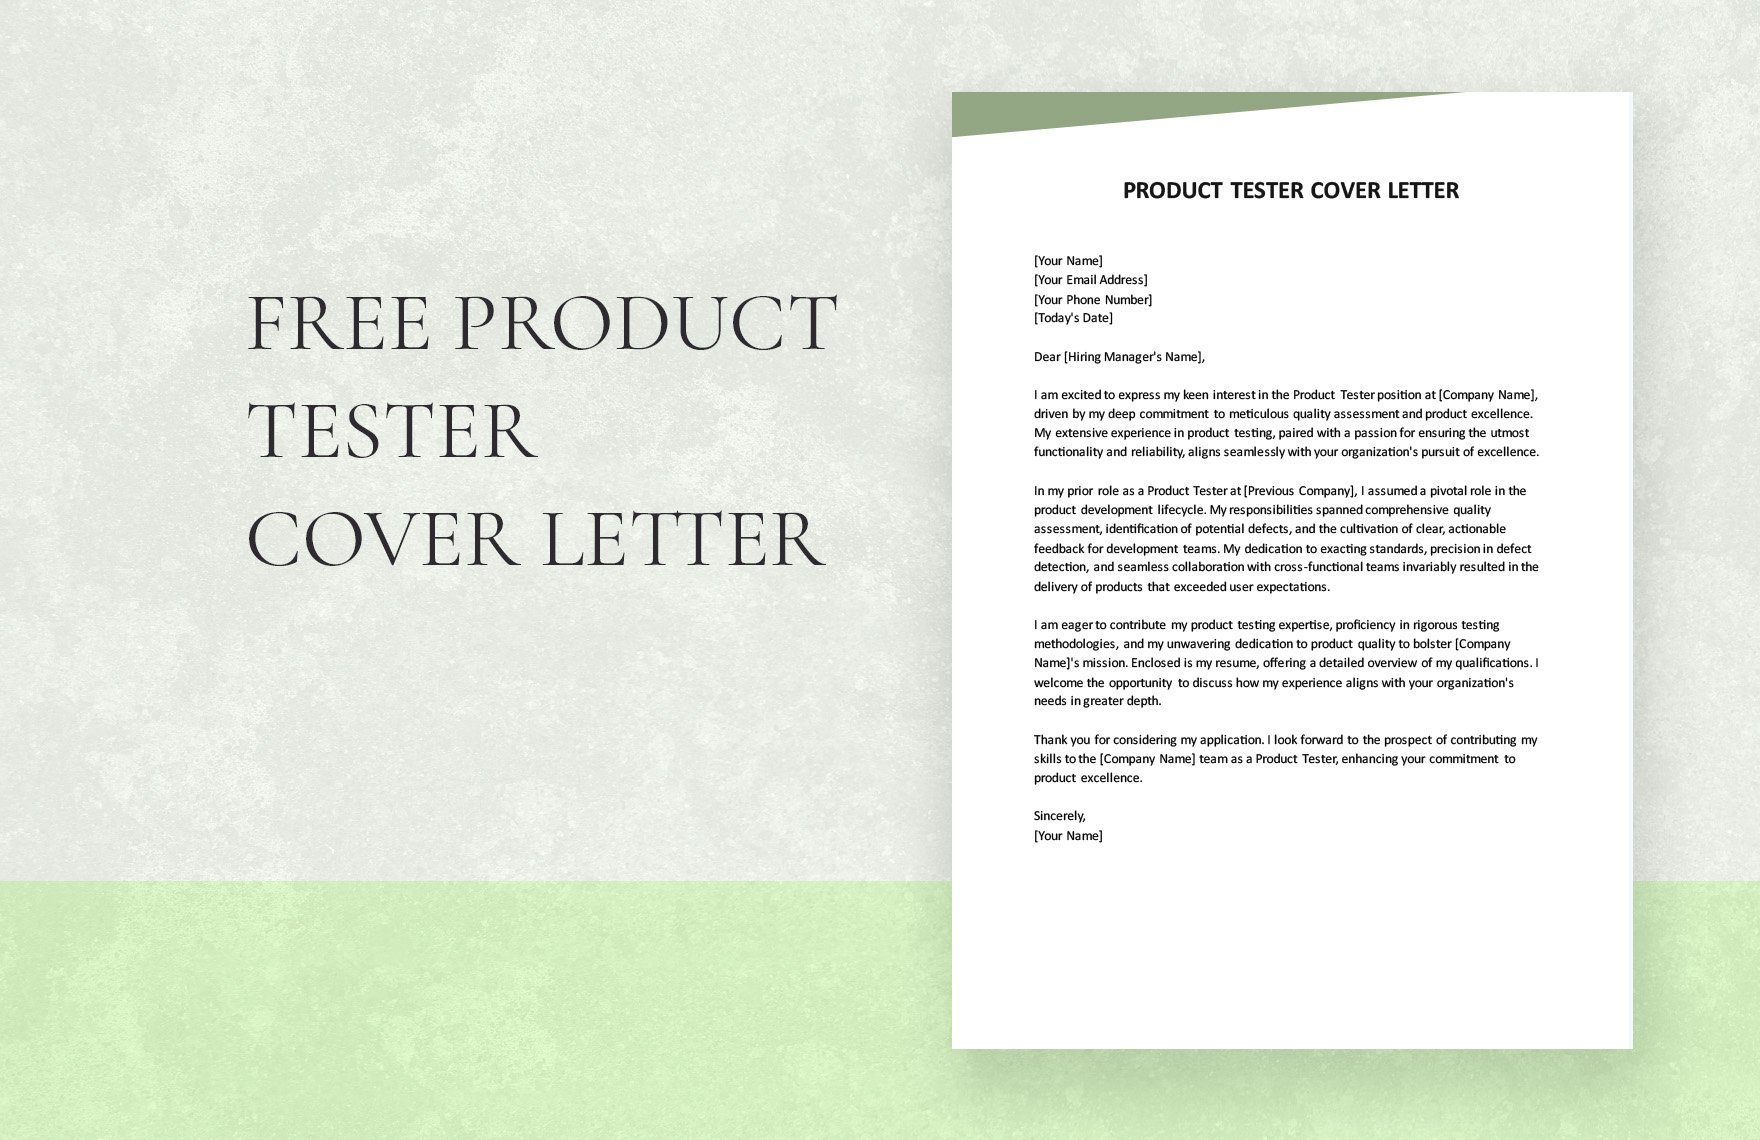 Product Tester Cover Letter in Word, Google Docs, PDF